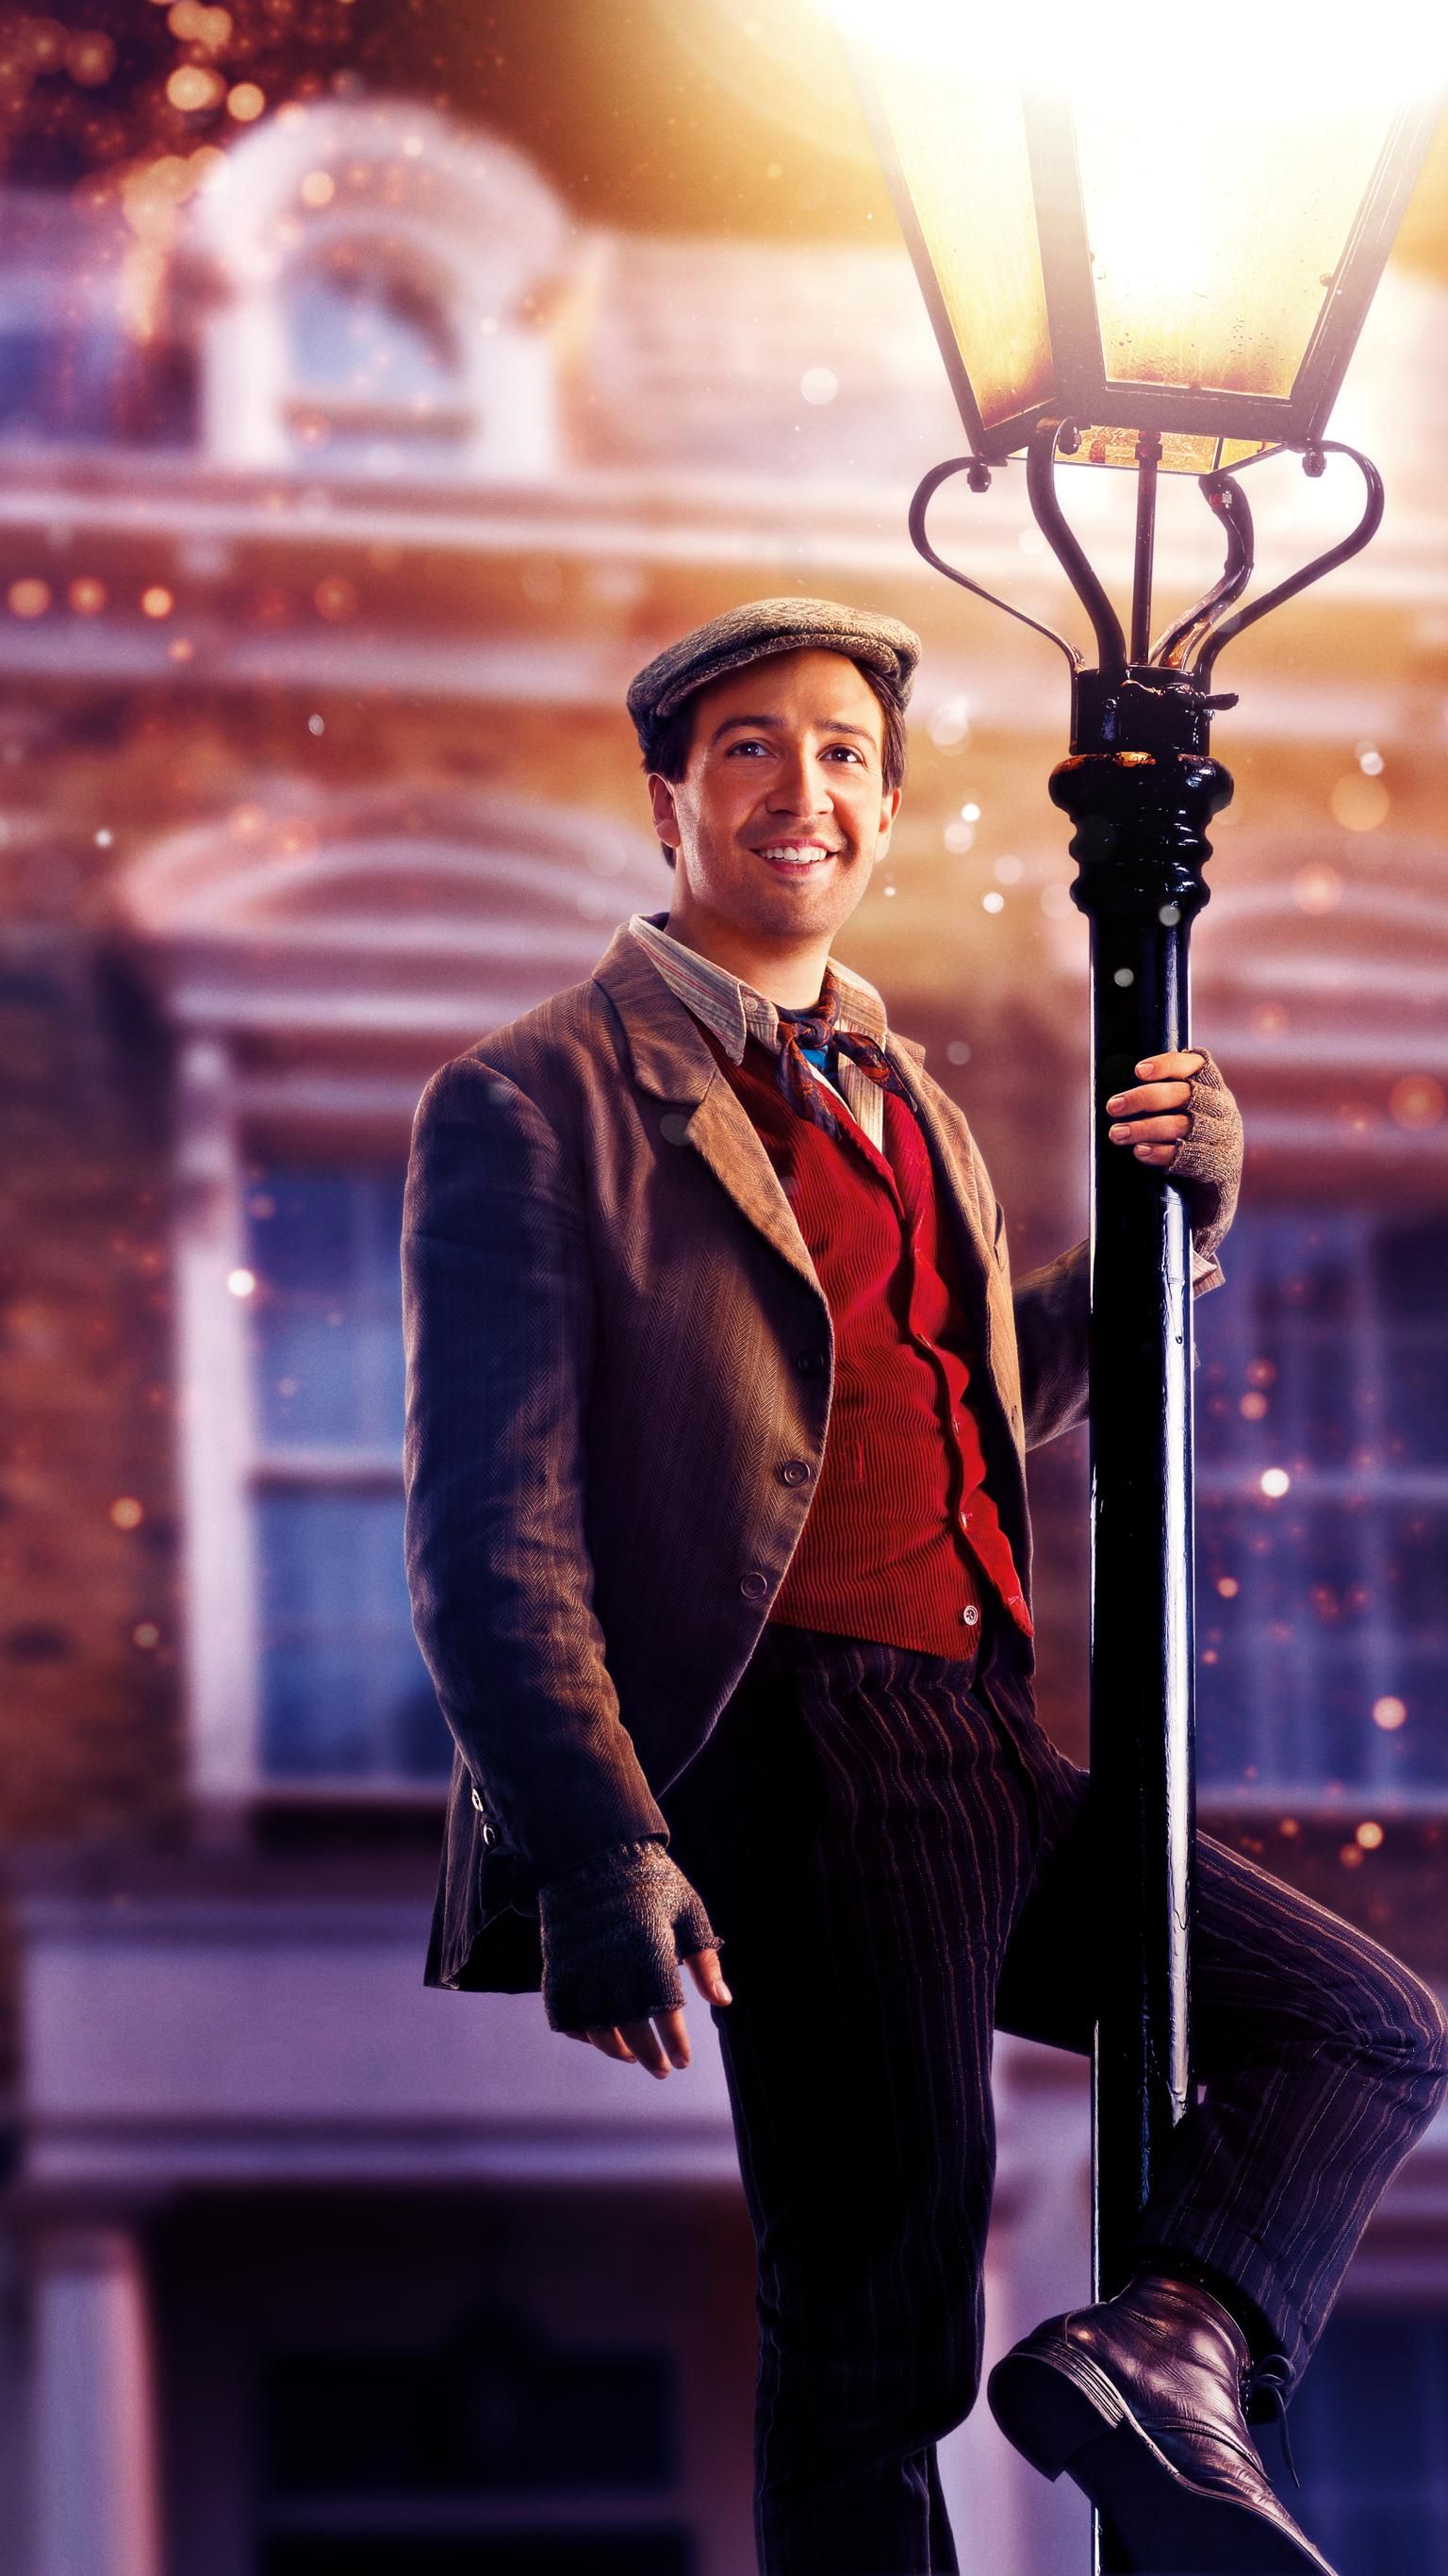 Mary Poppins Returns 2019 Movie Wallpapers